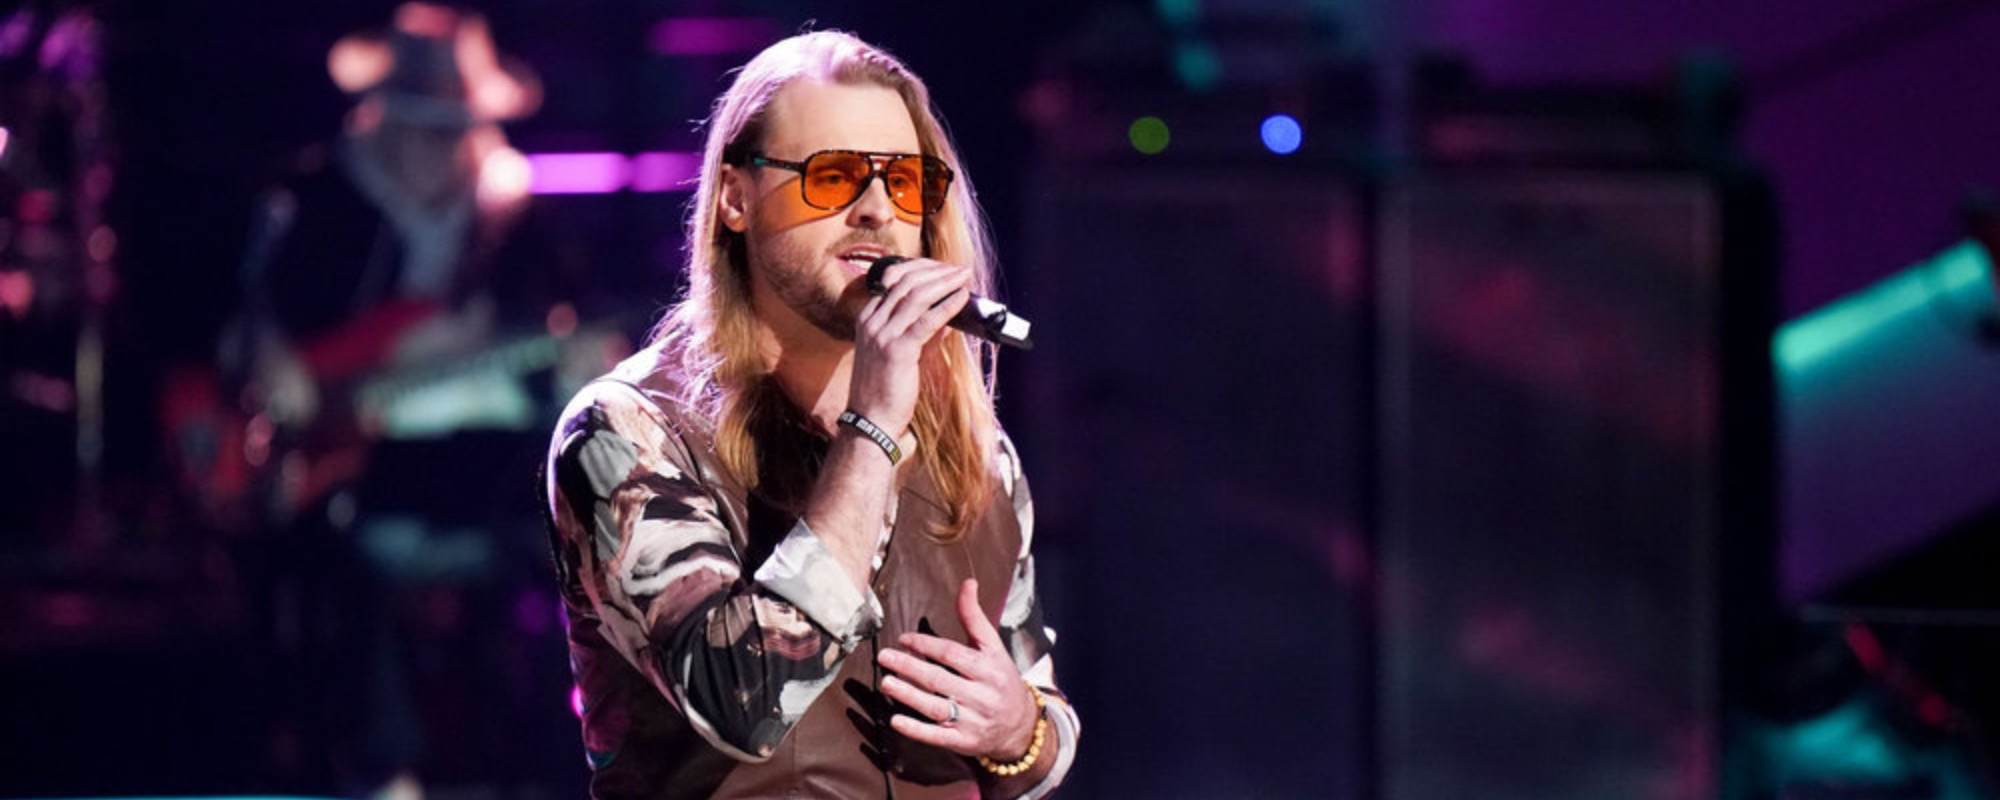 Ross Clayton Mesmerizes with Steely Dan’s “Dirty Work” on ‘The Voice’